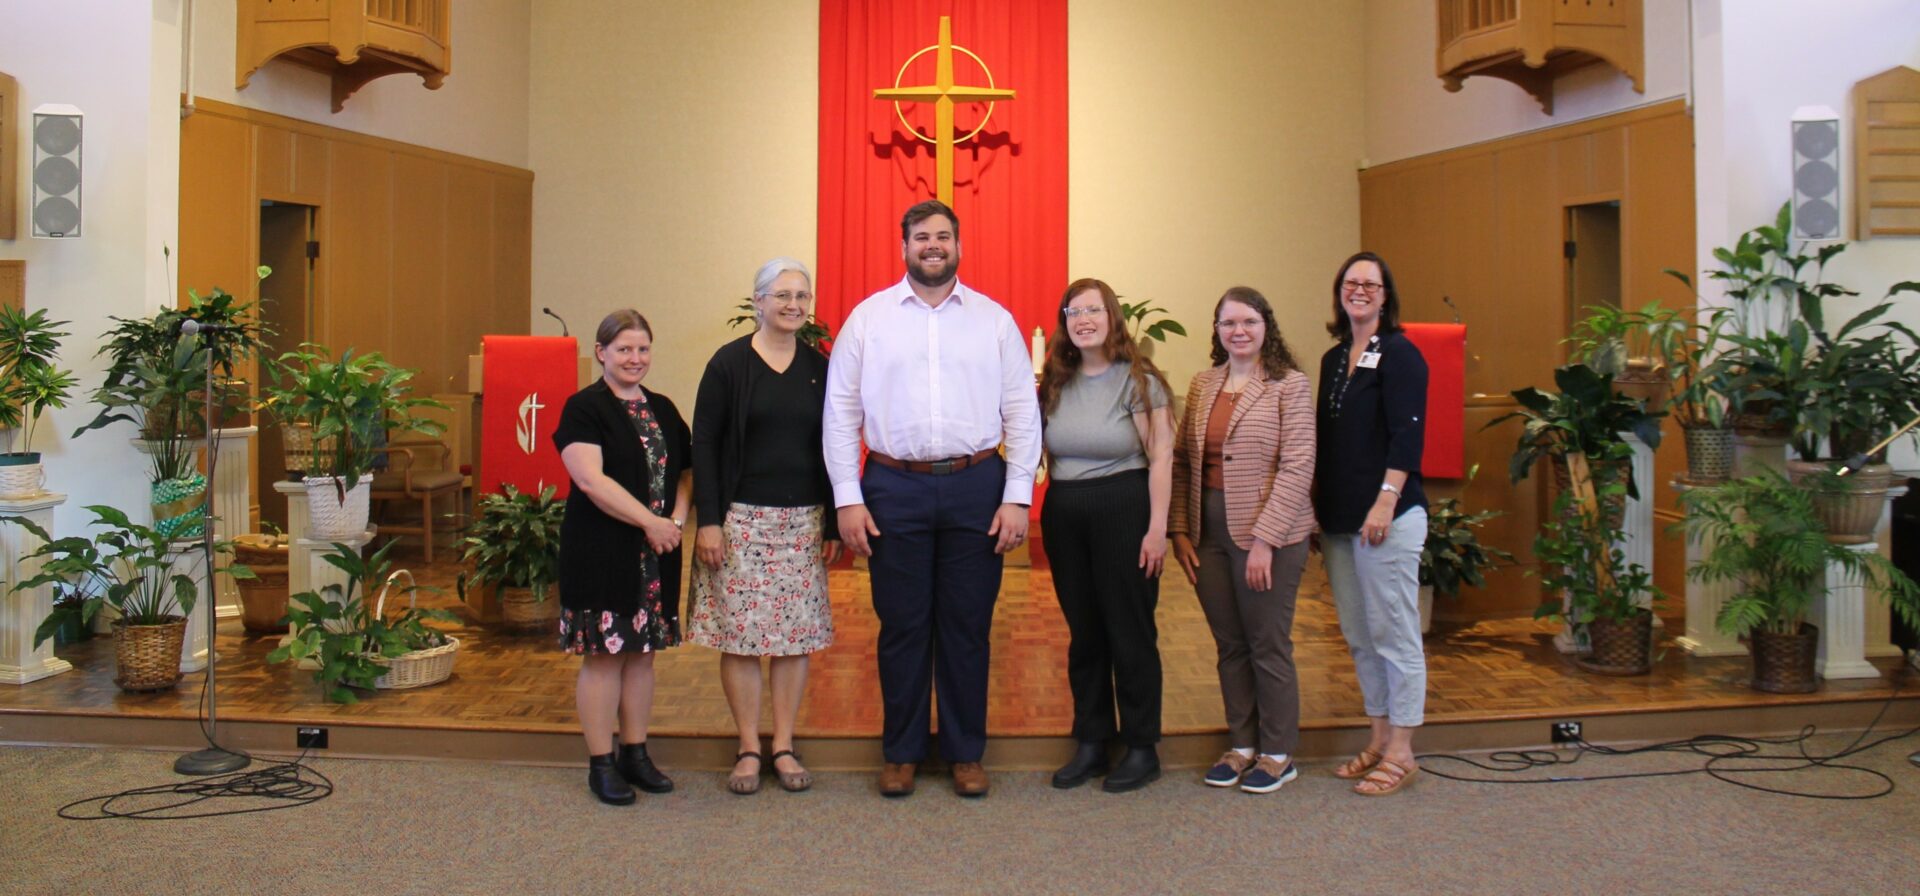 Summer 2023 CPE Chaplaincy Program Internship Students at VMP Healthcare and Community Living